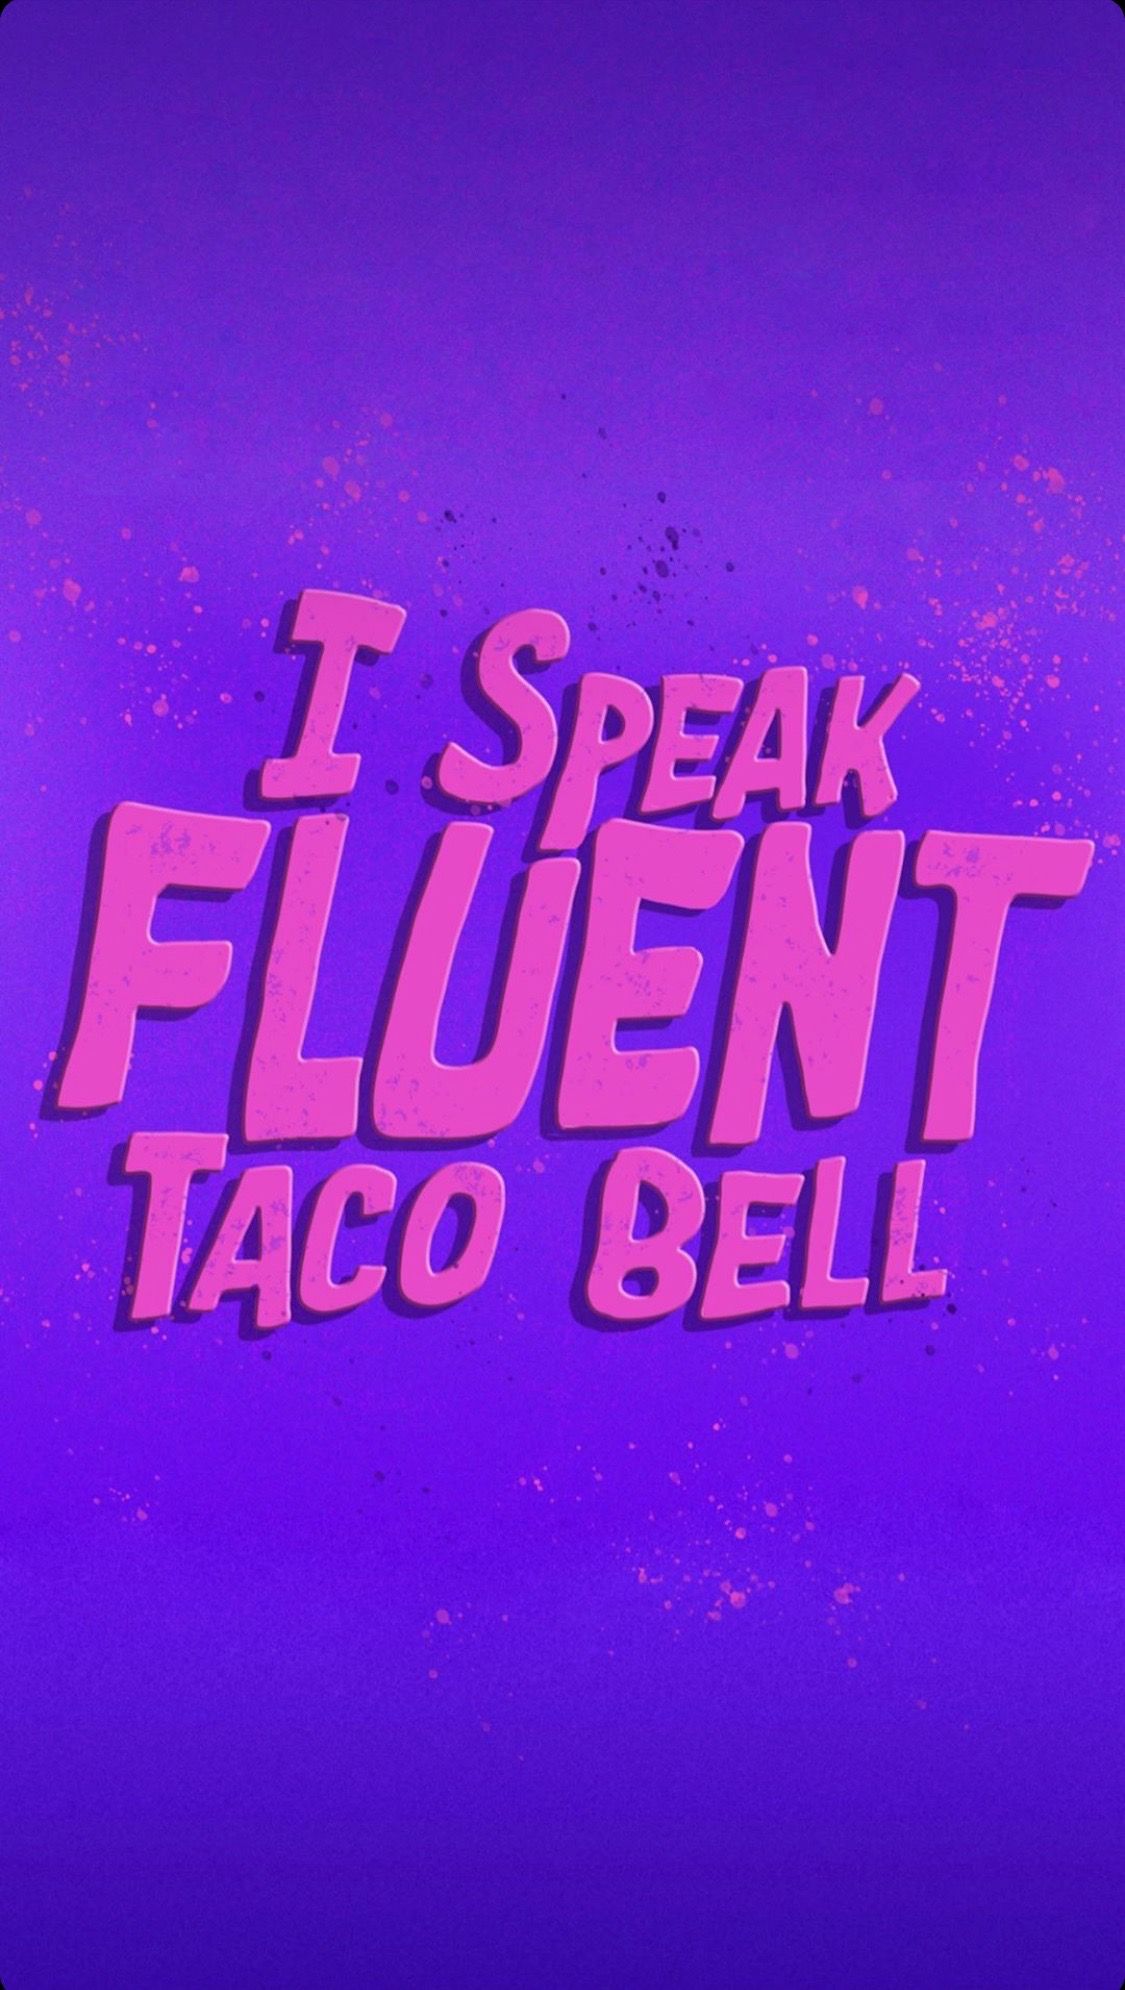 Taco Bell on Twitter Thirsty for new phone wallpapers  httpstcoHYlyxXPZTA httpstcoYzs1Xf2GJj  Twitter